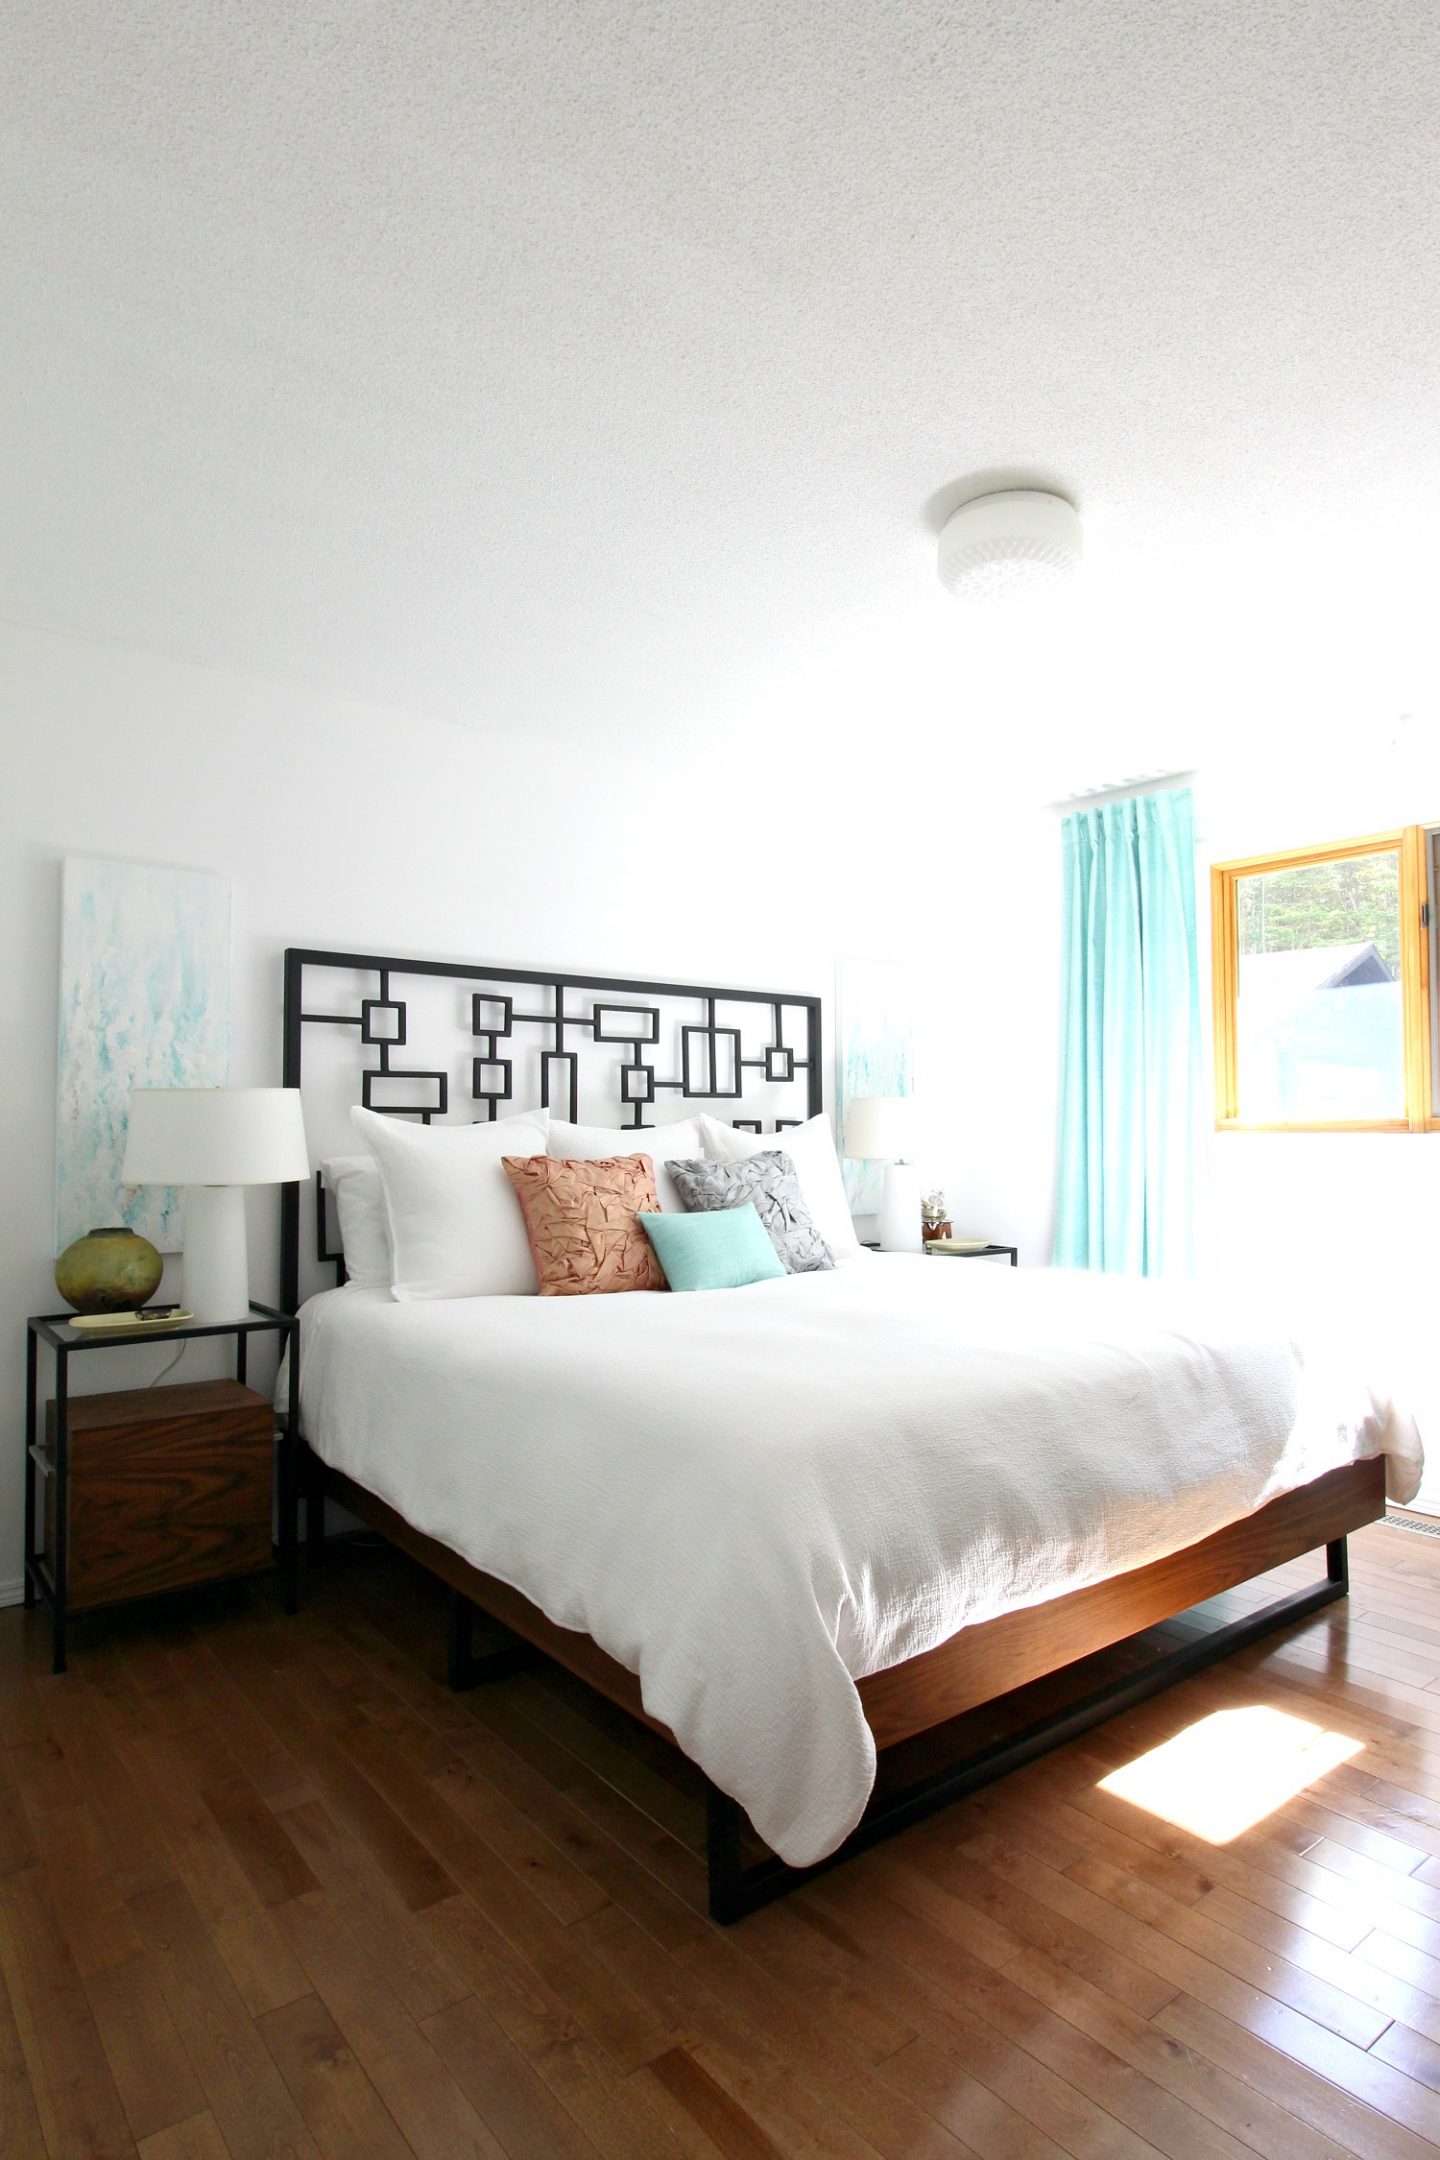 Peaceful Bedroom Decor Makeover with Muted Pastels